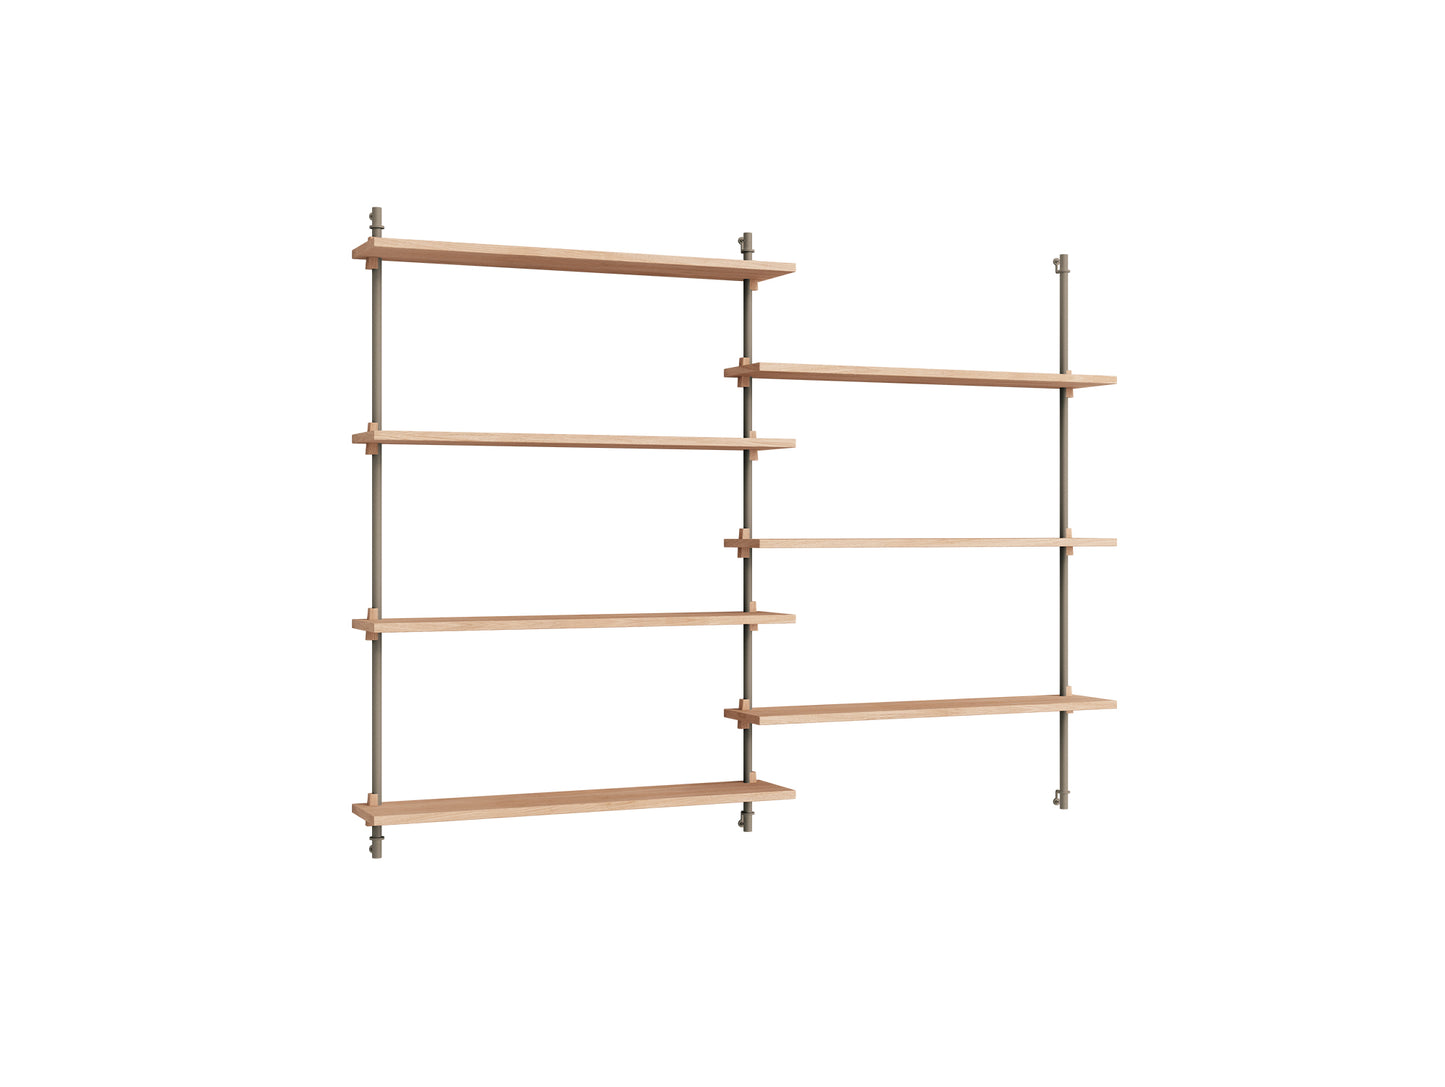 Wall Shelving System Sets (115 cm) by Moebe - WS.115.2 / Warm Grey Uprights / Oiled Oak